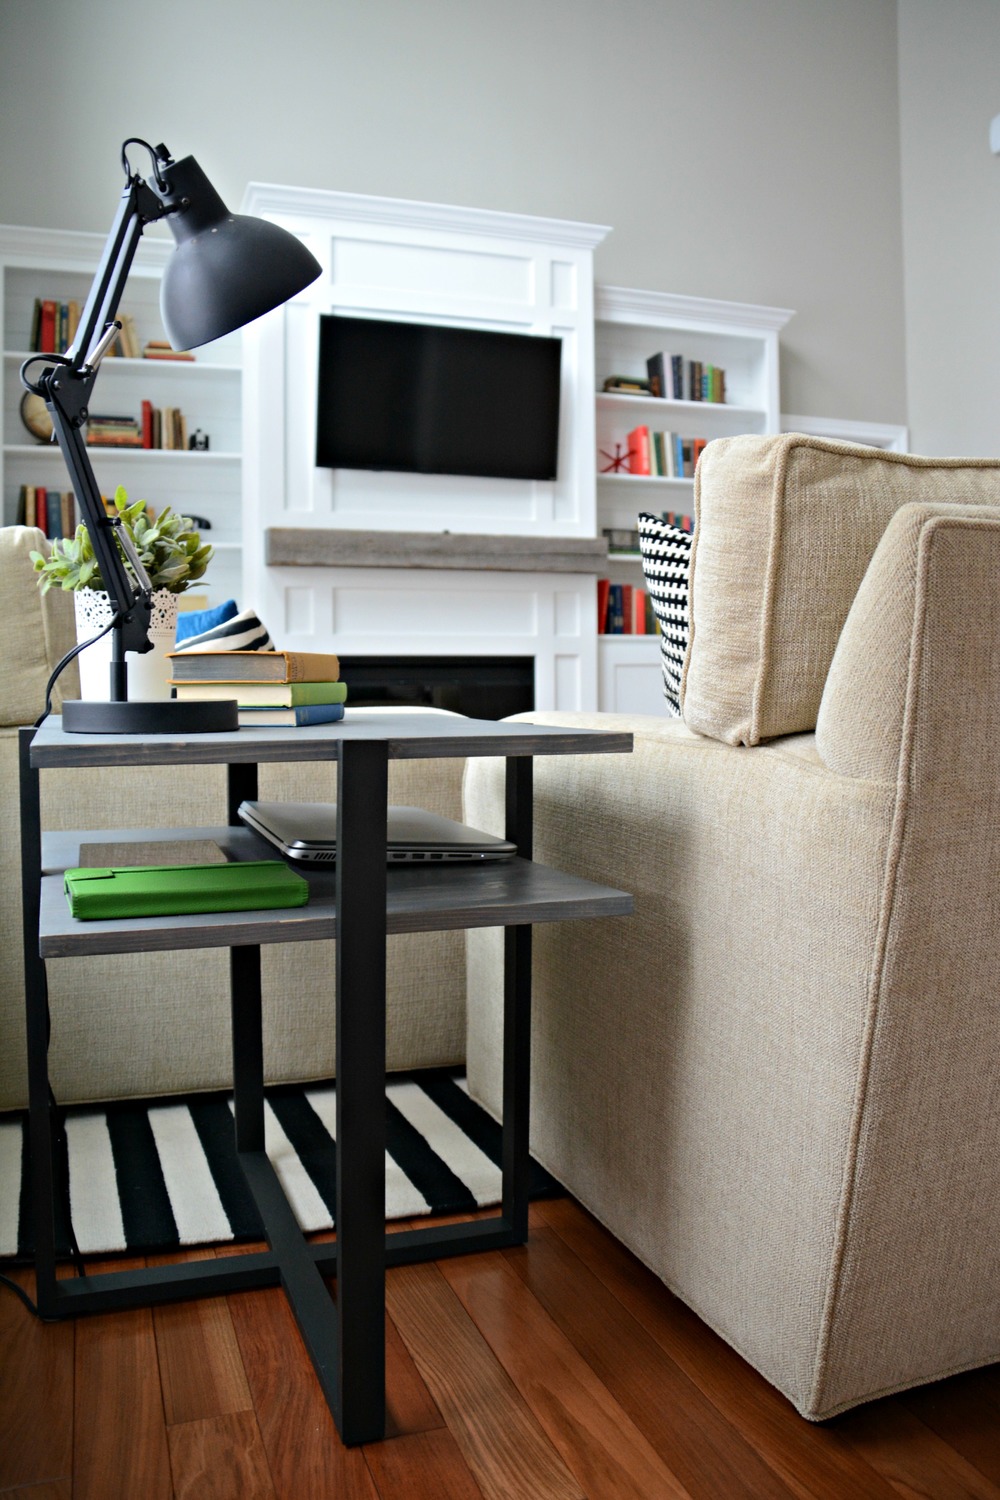 How To Decorate End Tables In The Living Room